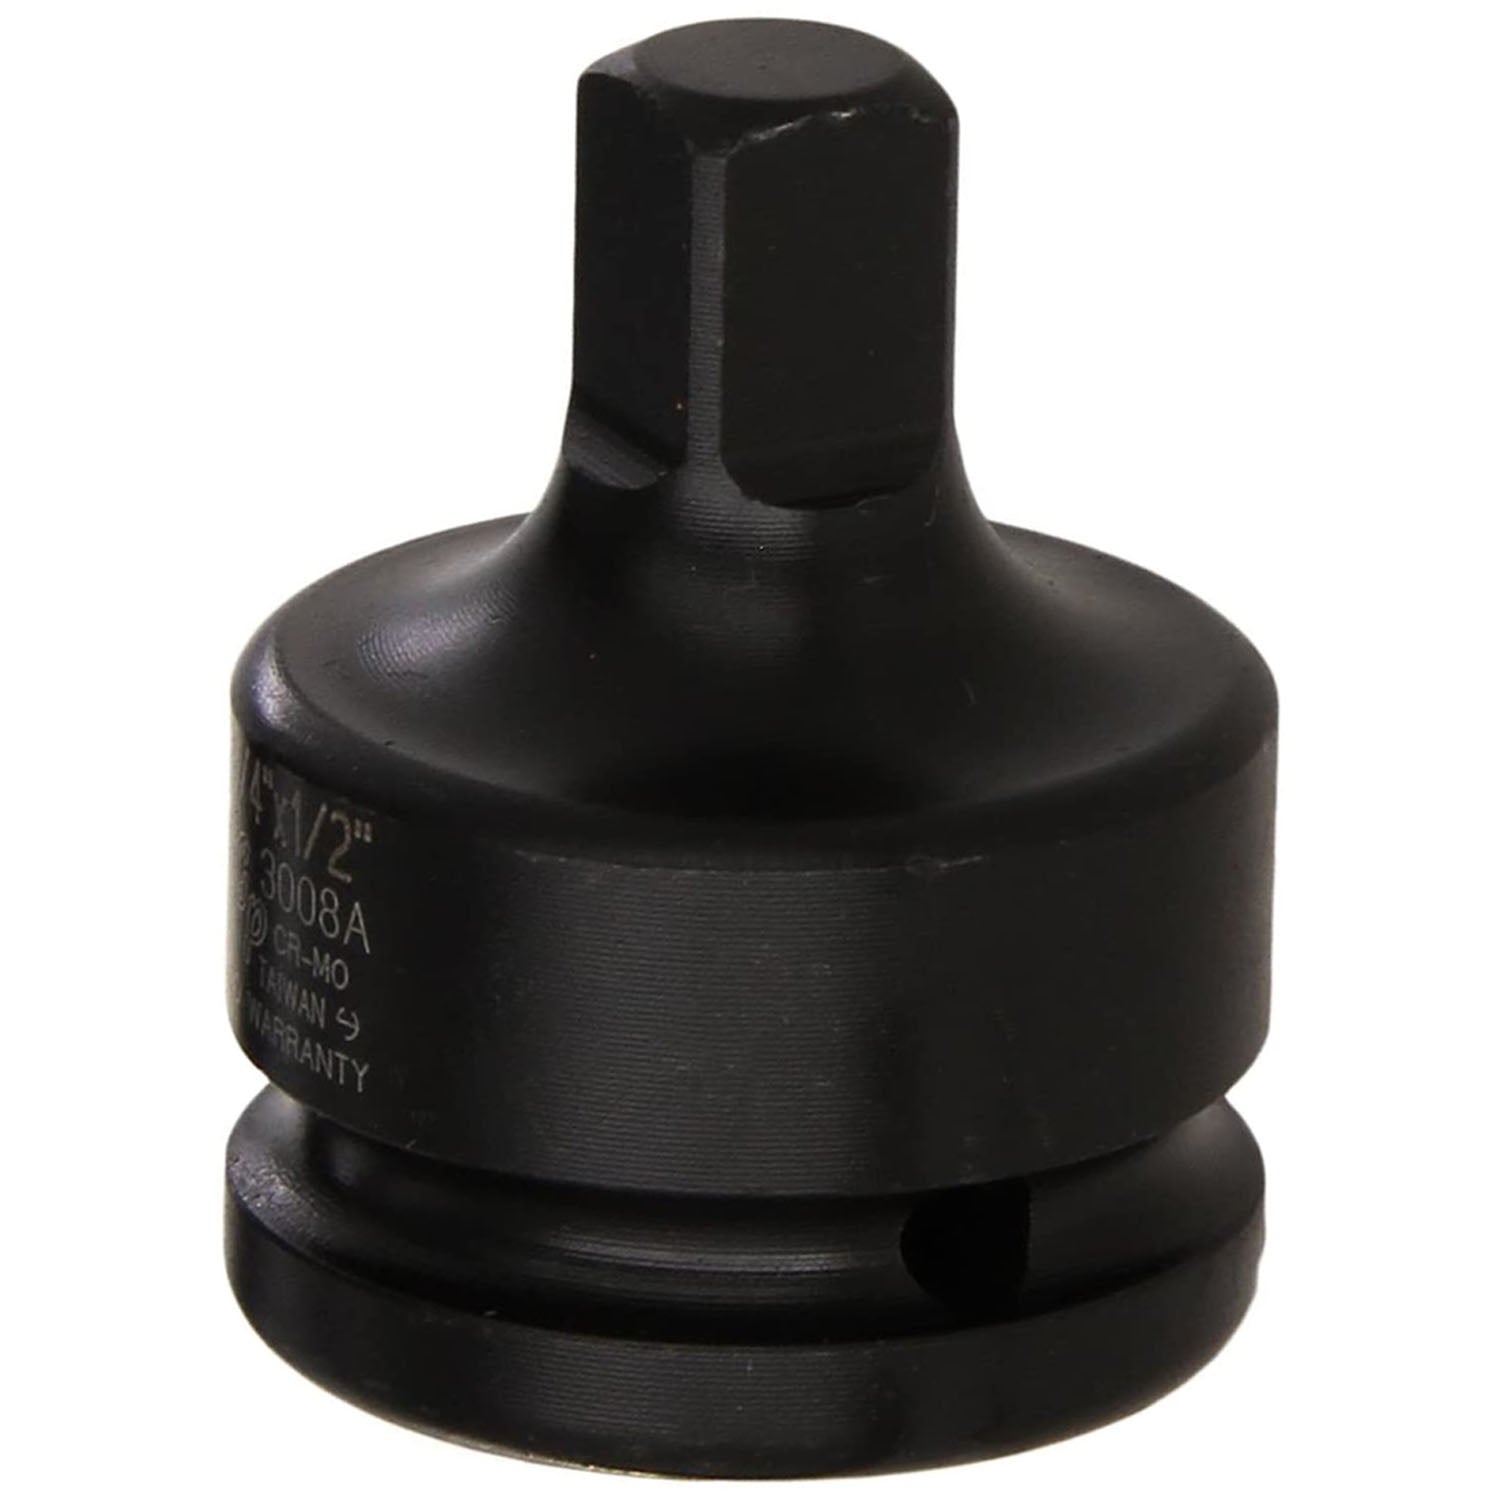 Grey Pneumatic 3008A 3/4" Drive 1/2" Impact Adapter with Friction Ball